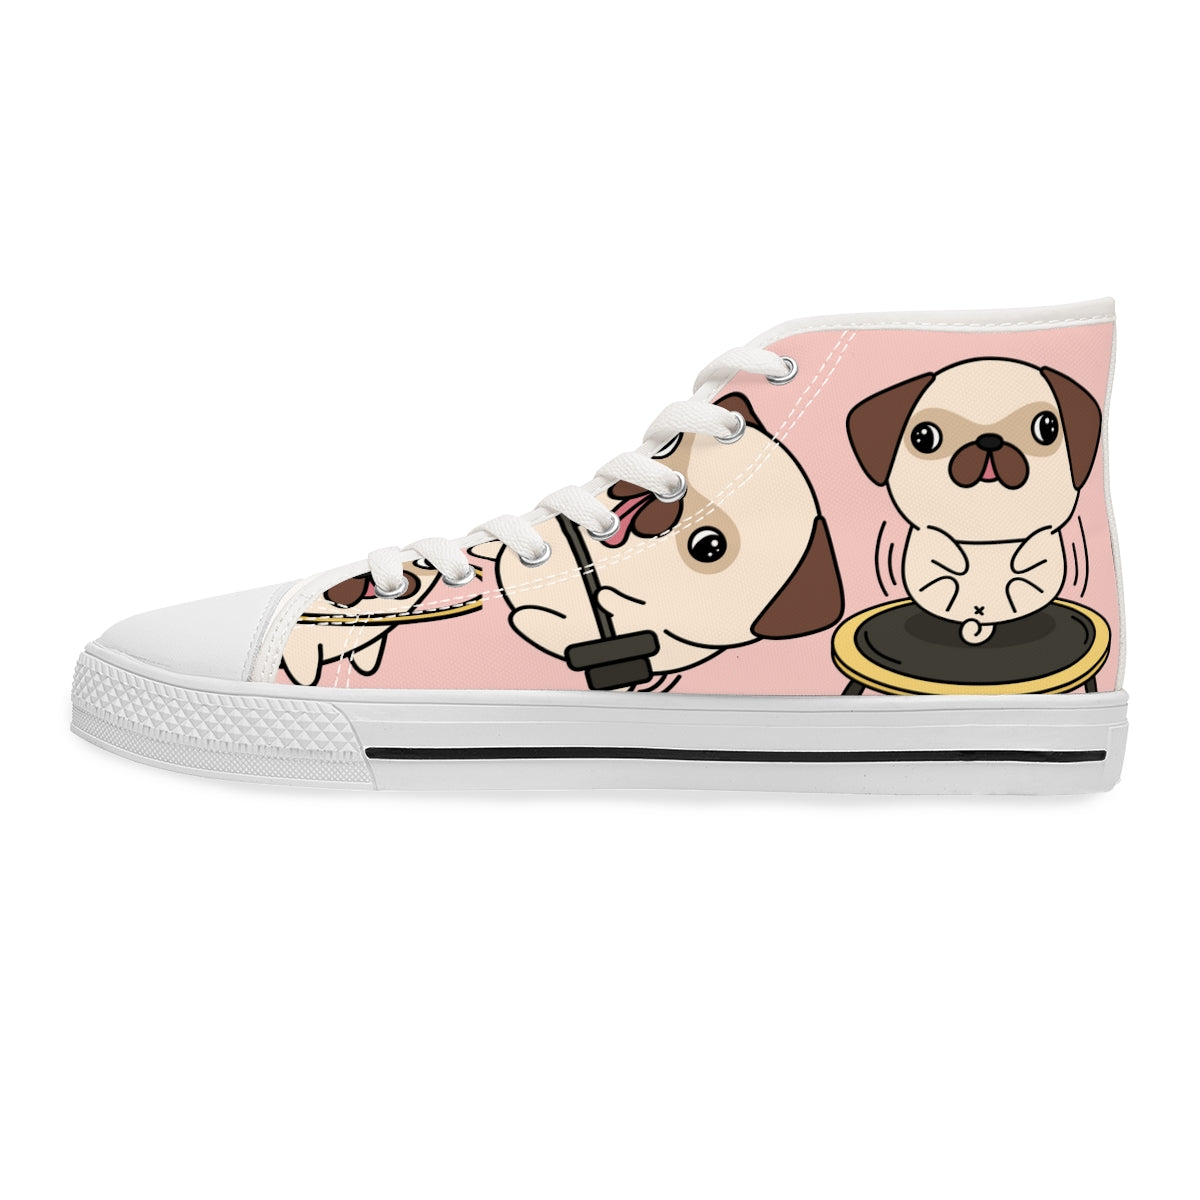 DOG PUPPIES WOMEN'S HIGH TOP SNEAKERS PINK WHITE | ARTZIRA, DOG LOVERS SNEAKERS